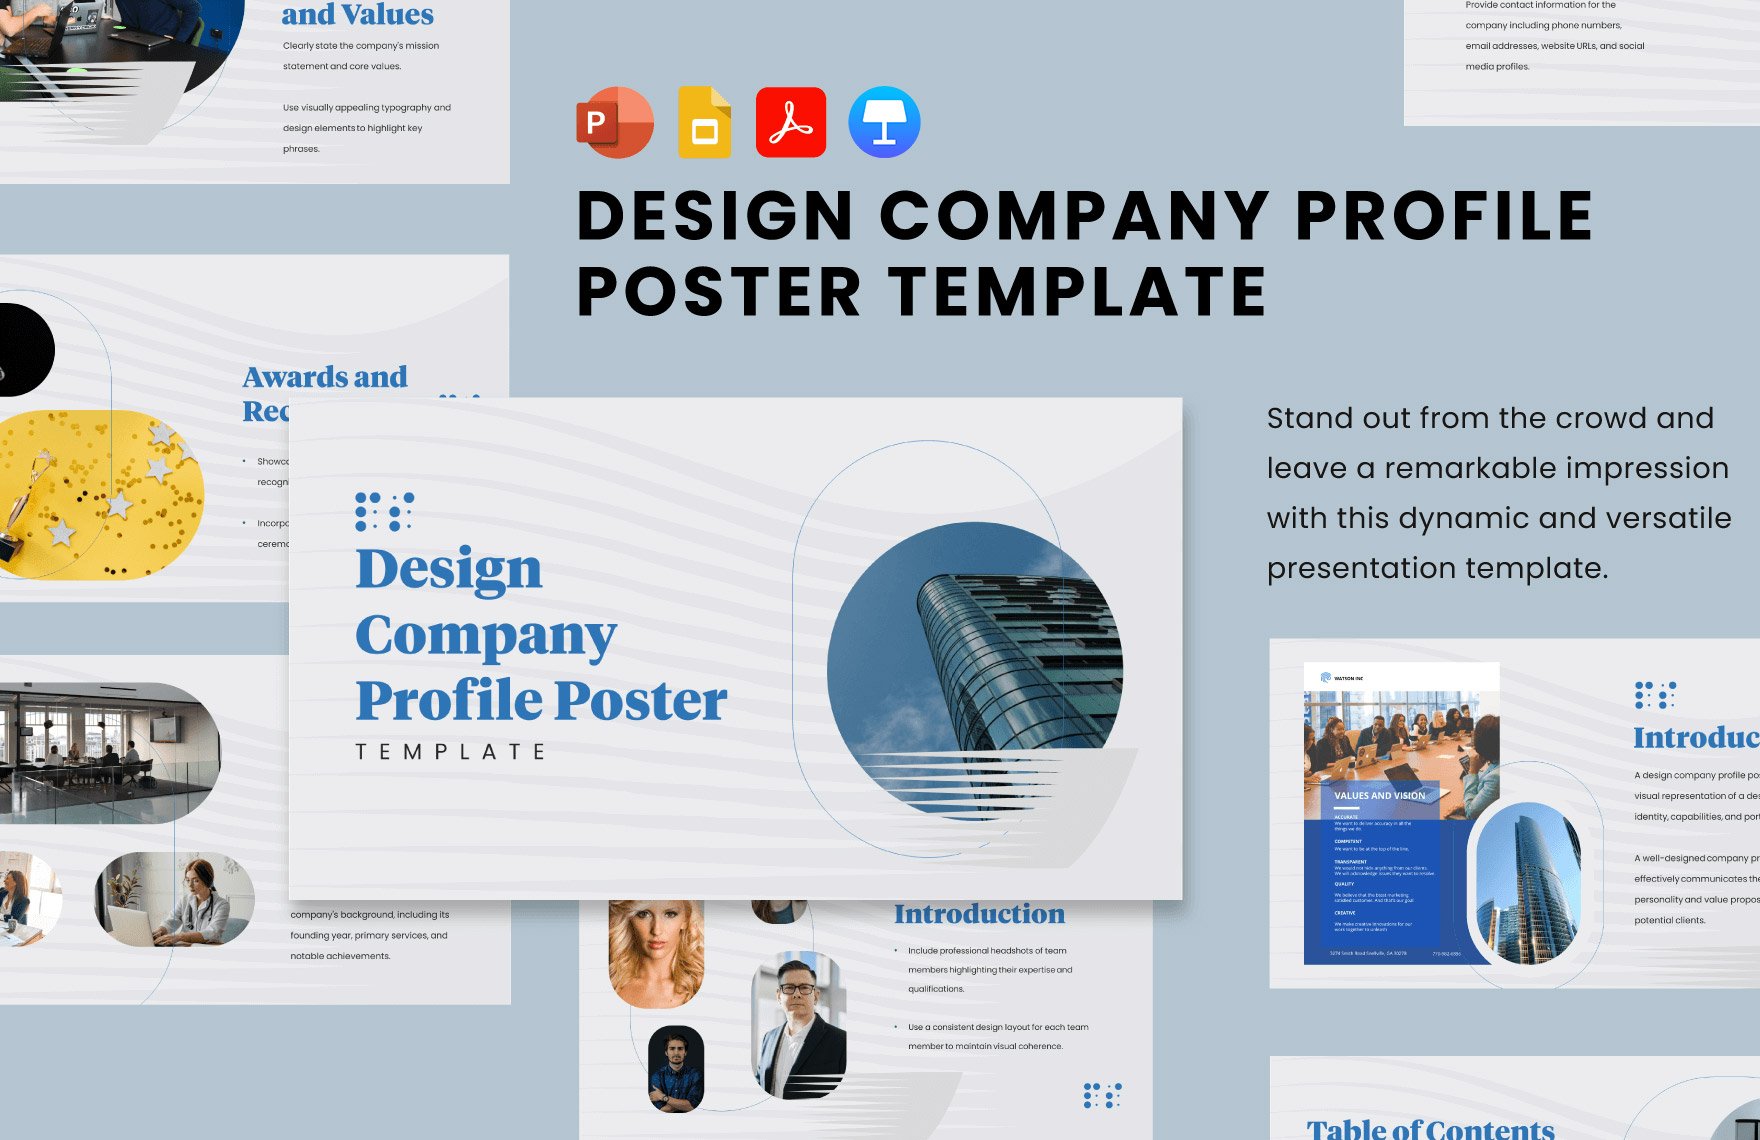 Design Company Profile Poster Template in PDF, PowerPoint, Google Slides, Apple Keynote